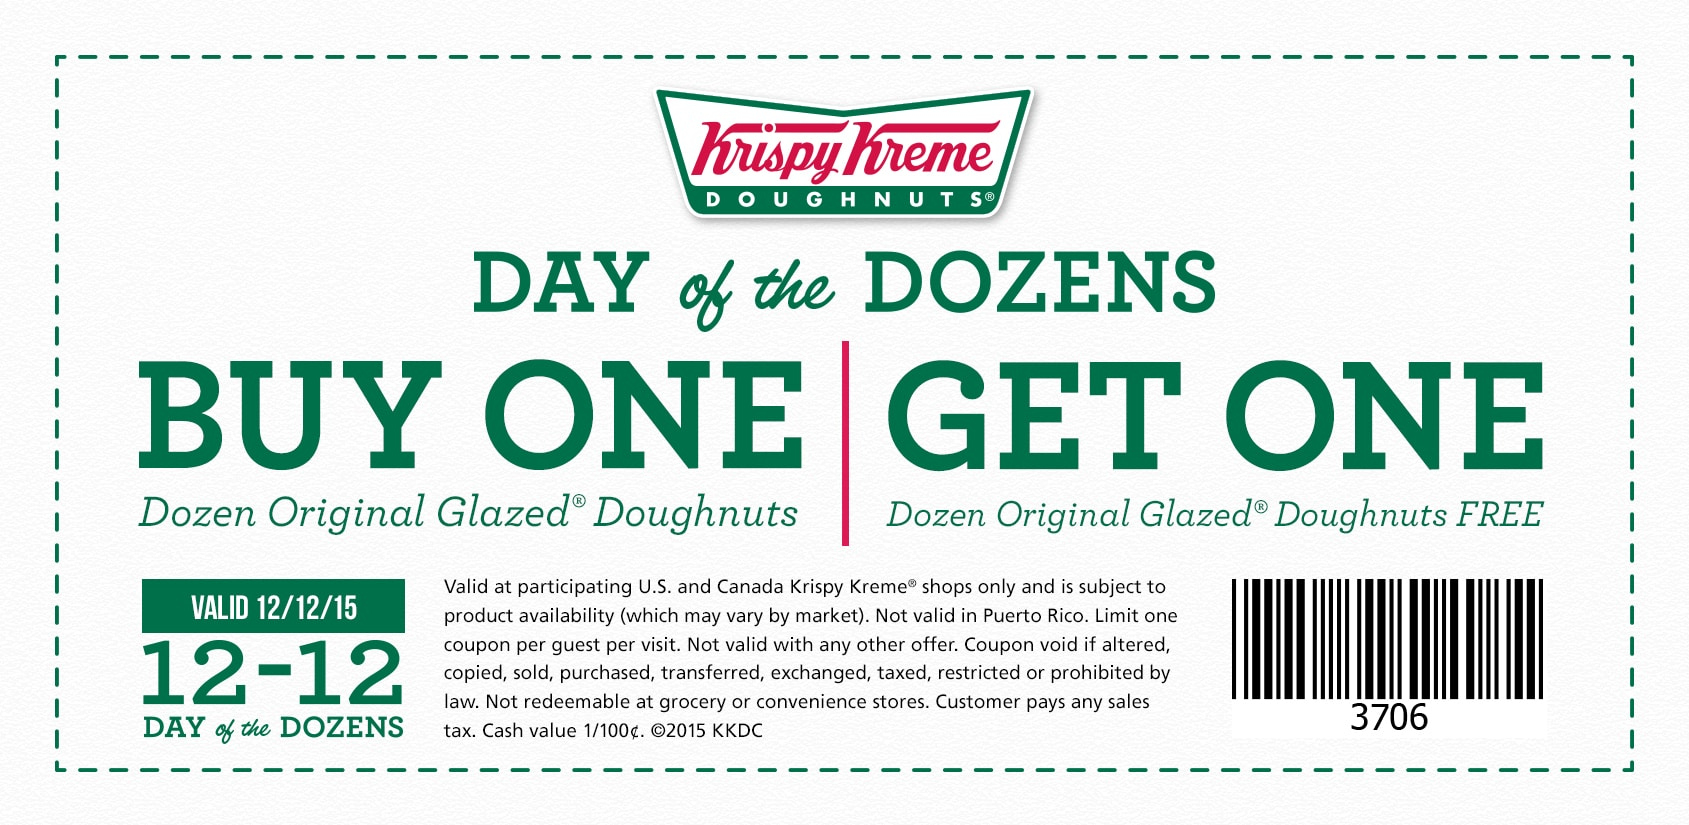 How And Where To Get A Free Dozen Krispy Kreme Donuts This Weekend intended for Free Printable Krispy Kreme Coupons